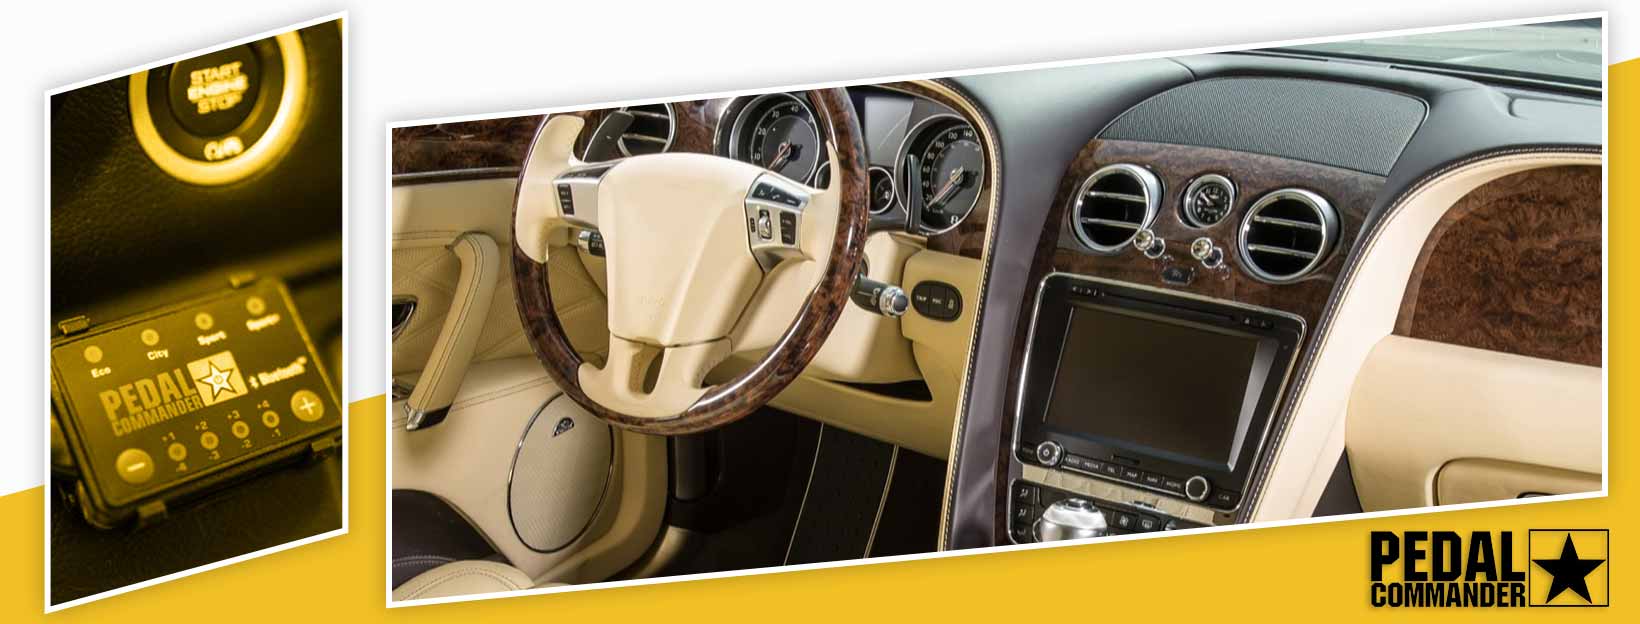 Pedal Commander for Bentley Continental Flying Spur - interior